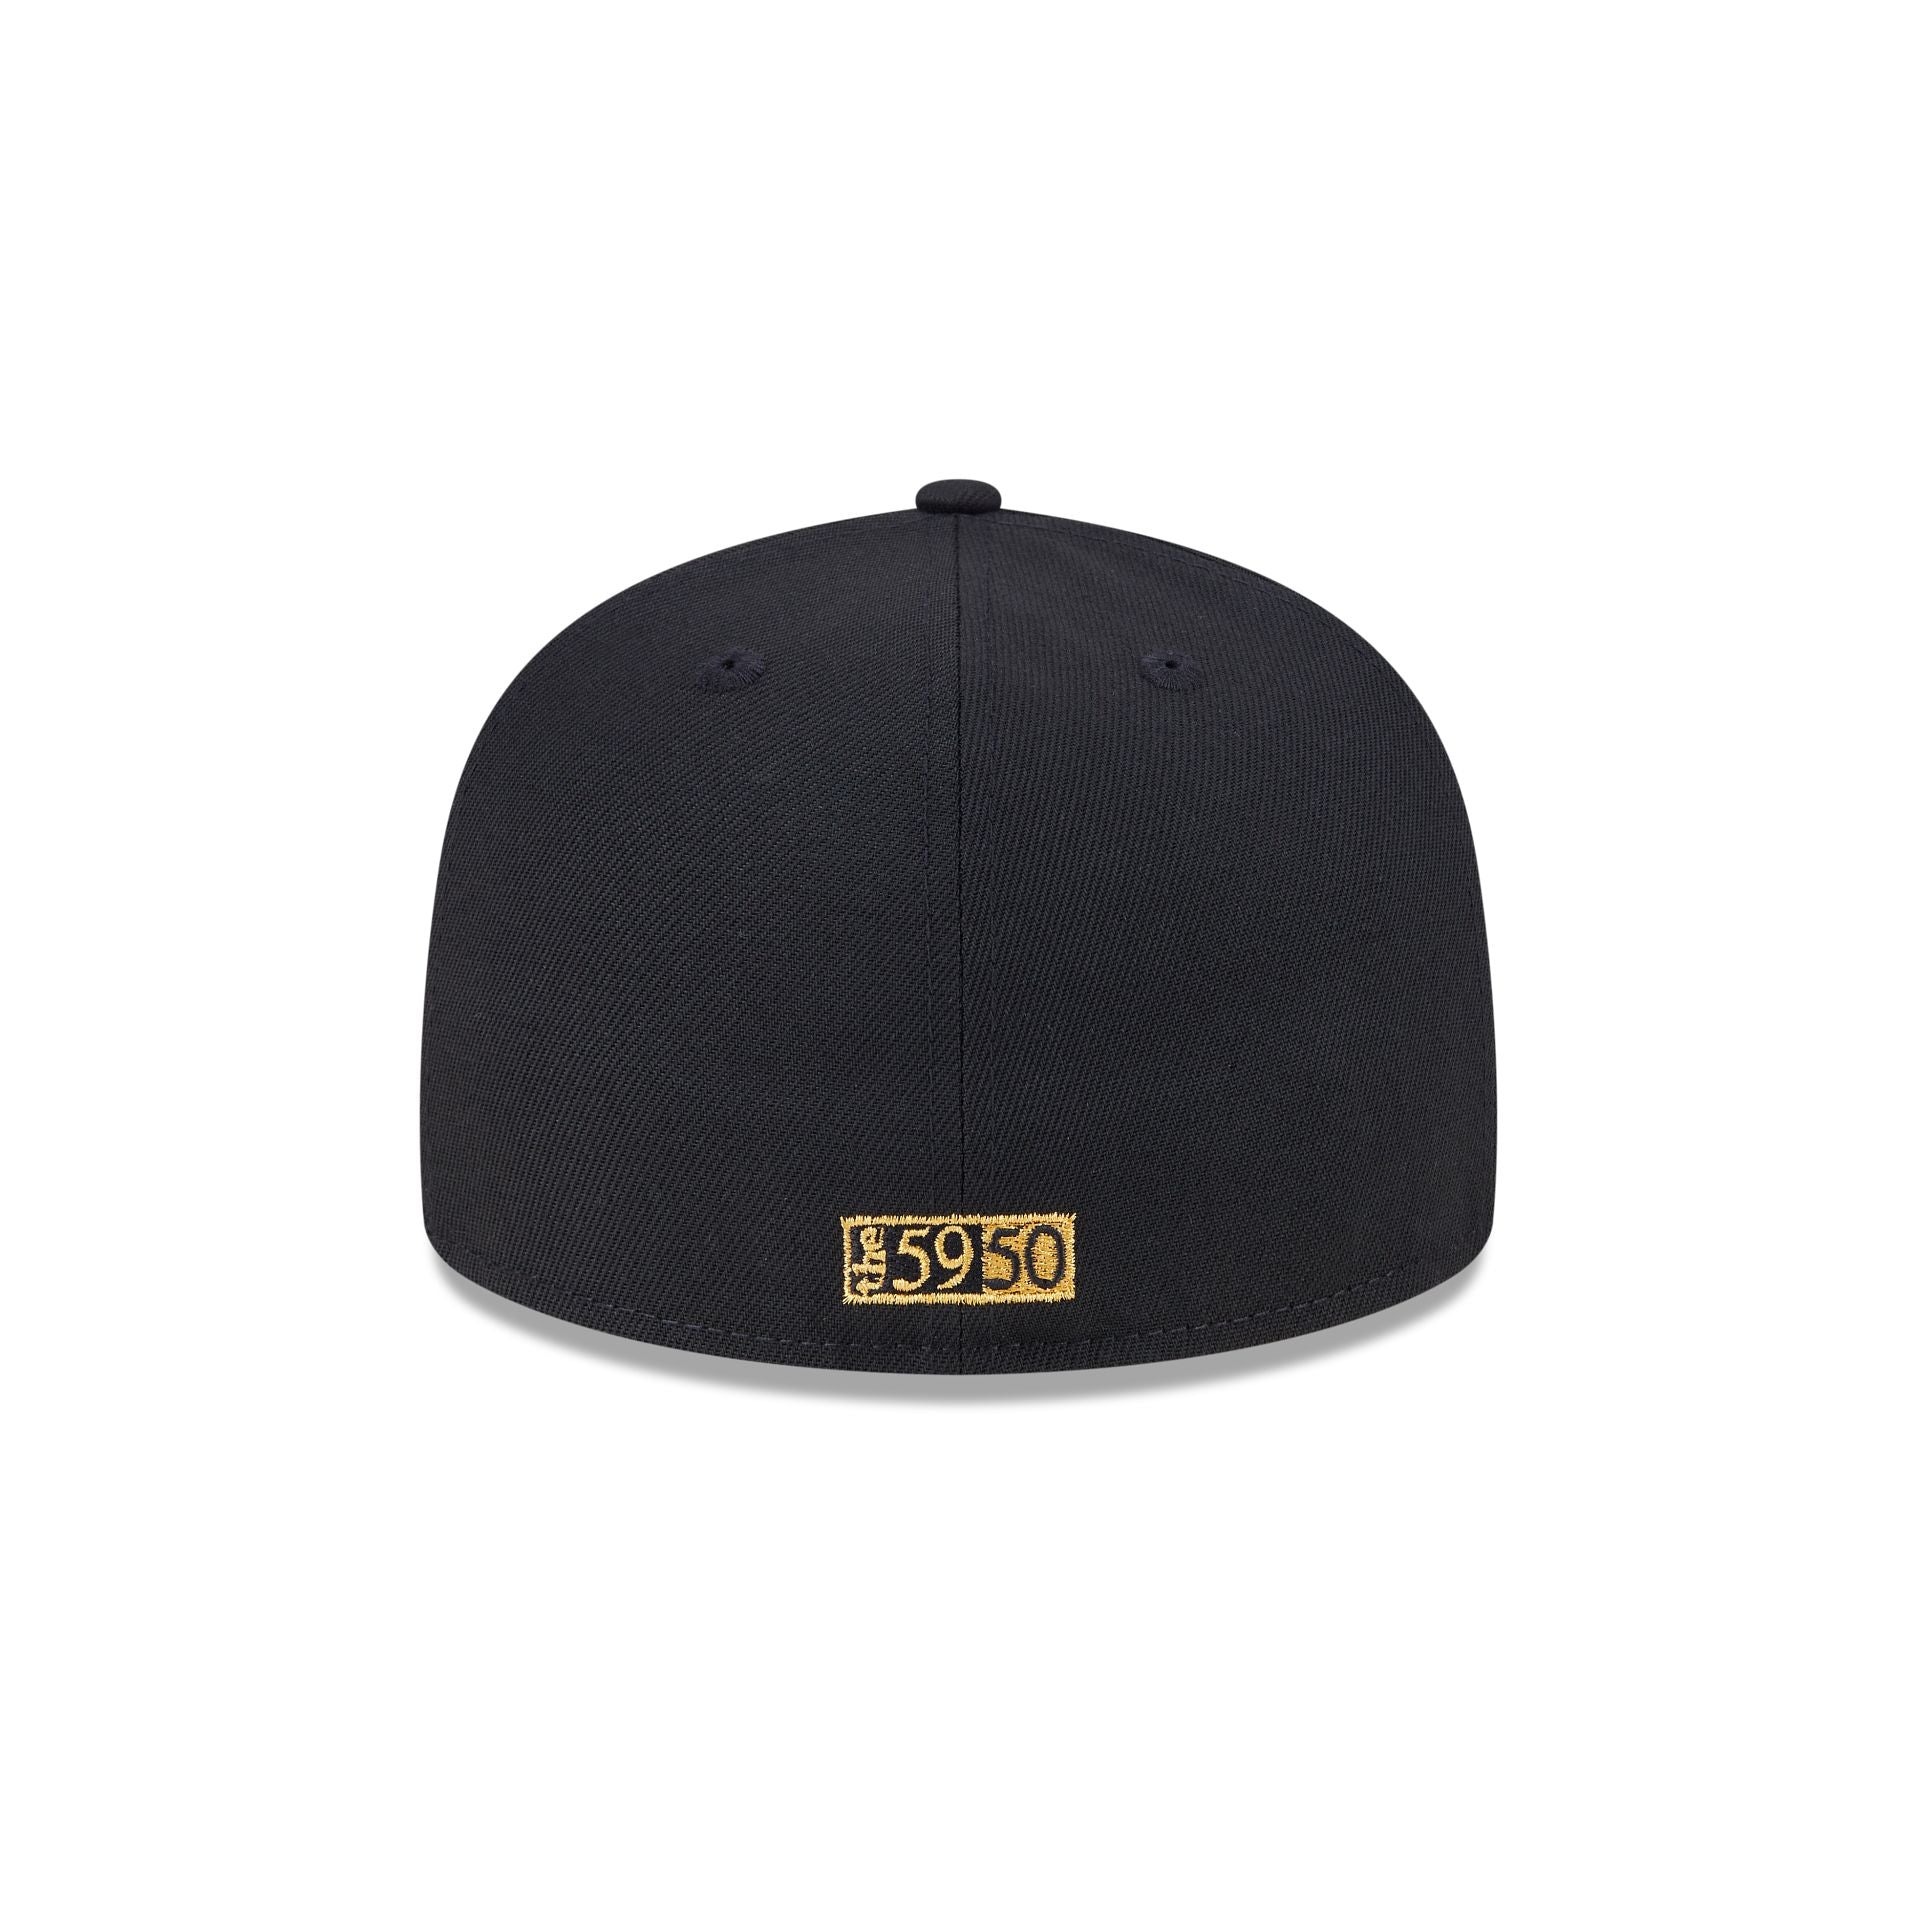 New Era Cap Signature Size Black 59FIFTY Fitted